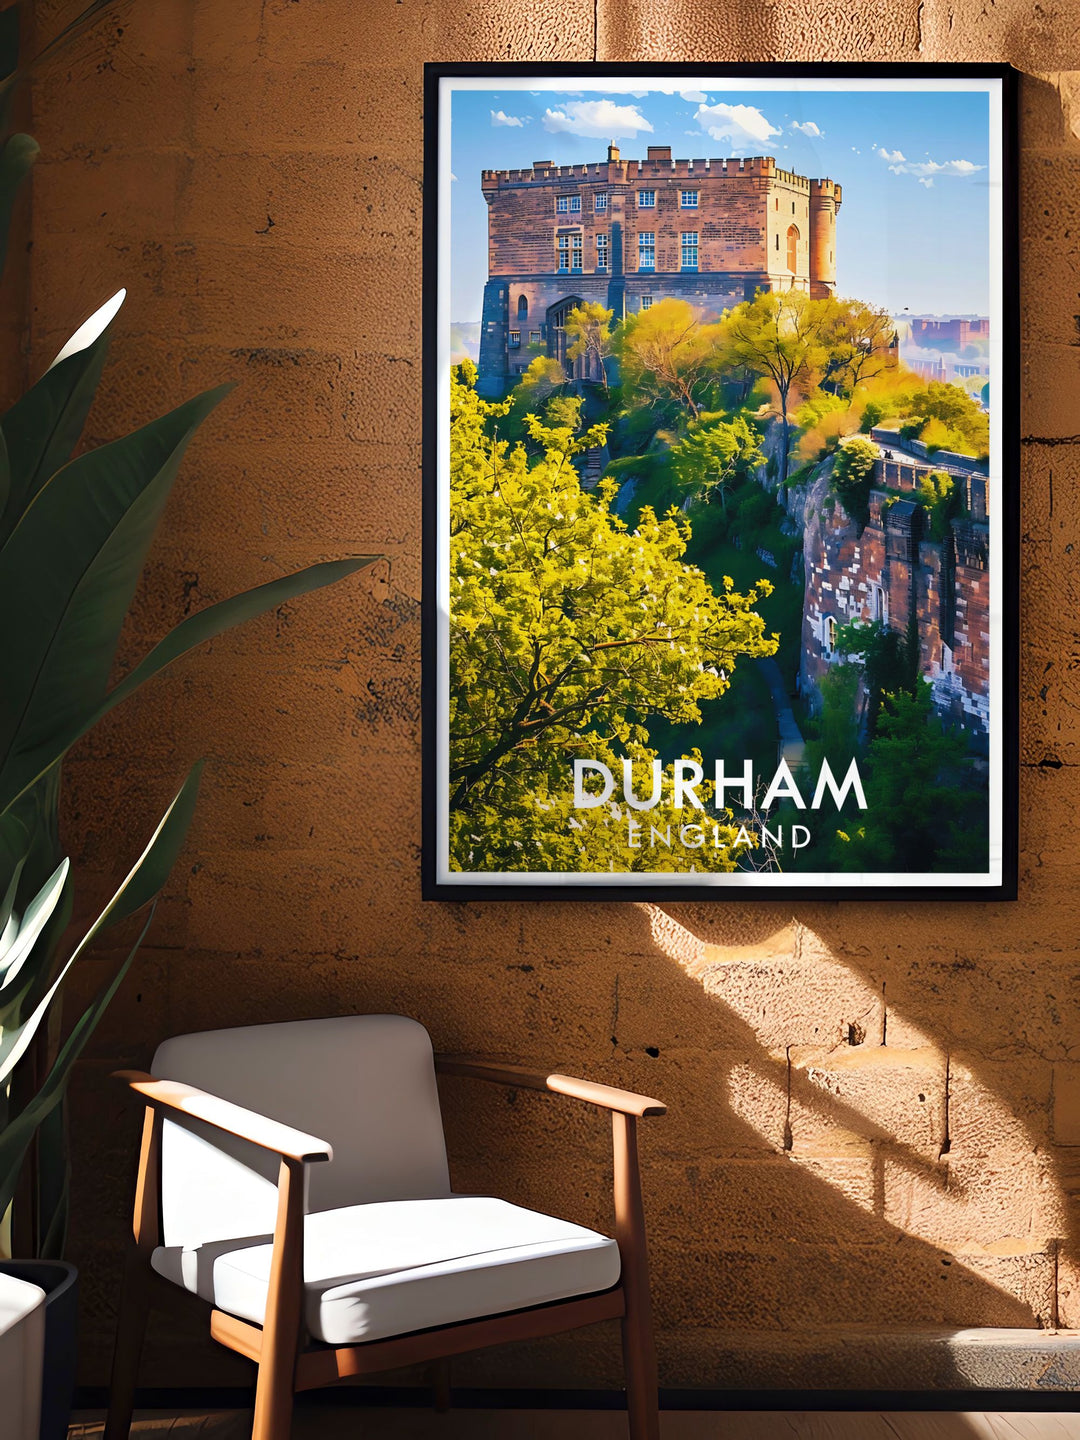 This art print showcases Durhams iconic skyline, dominated by the majestic Durham Castle and Cathedral, perfect for enhancing any home or office decor.